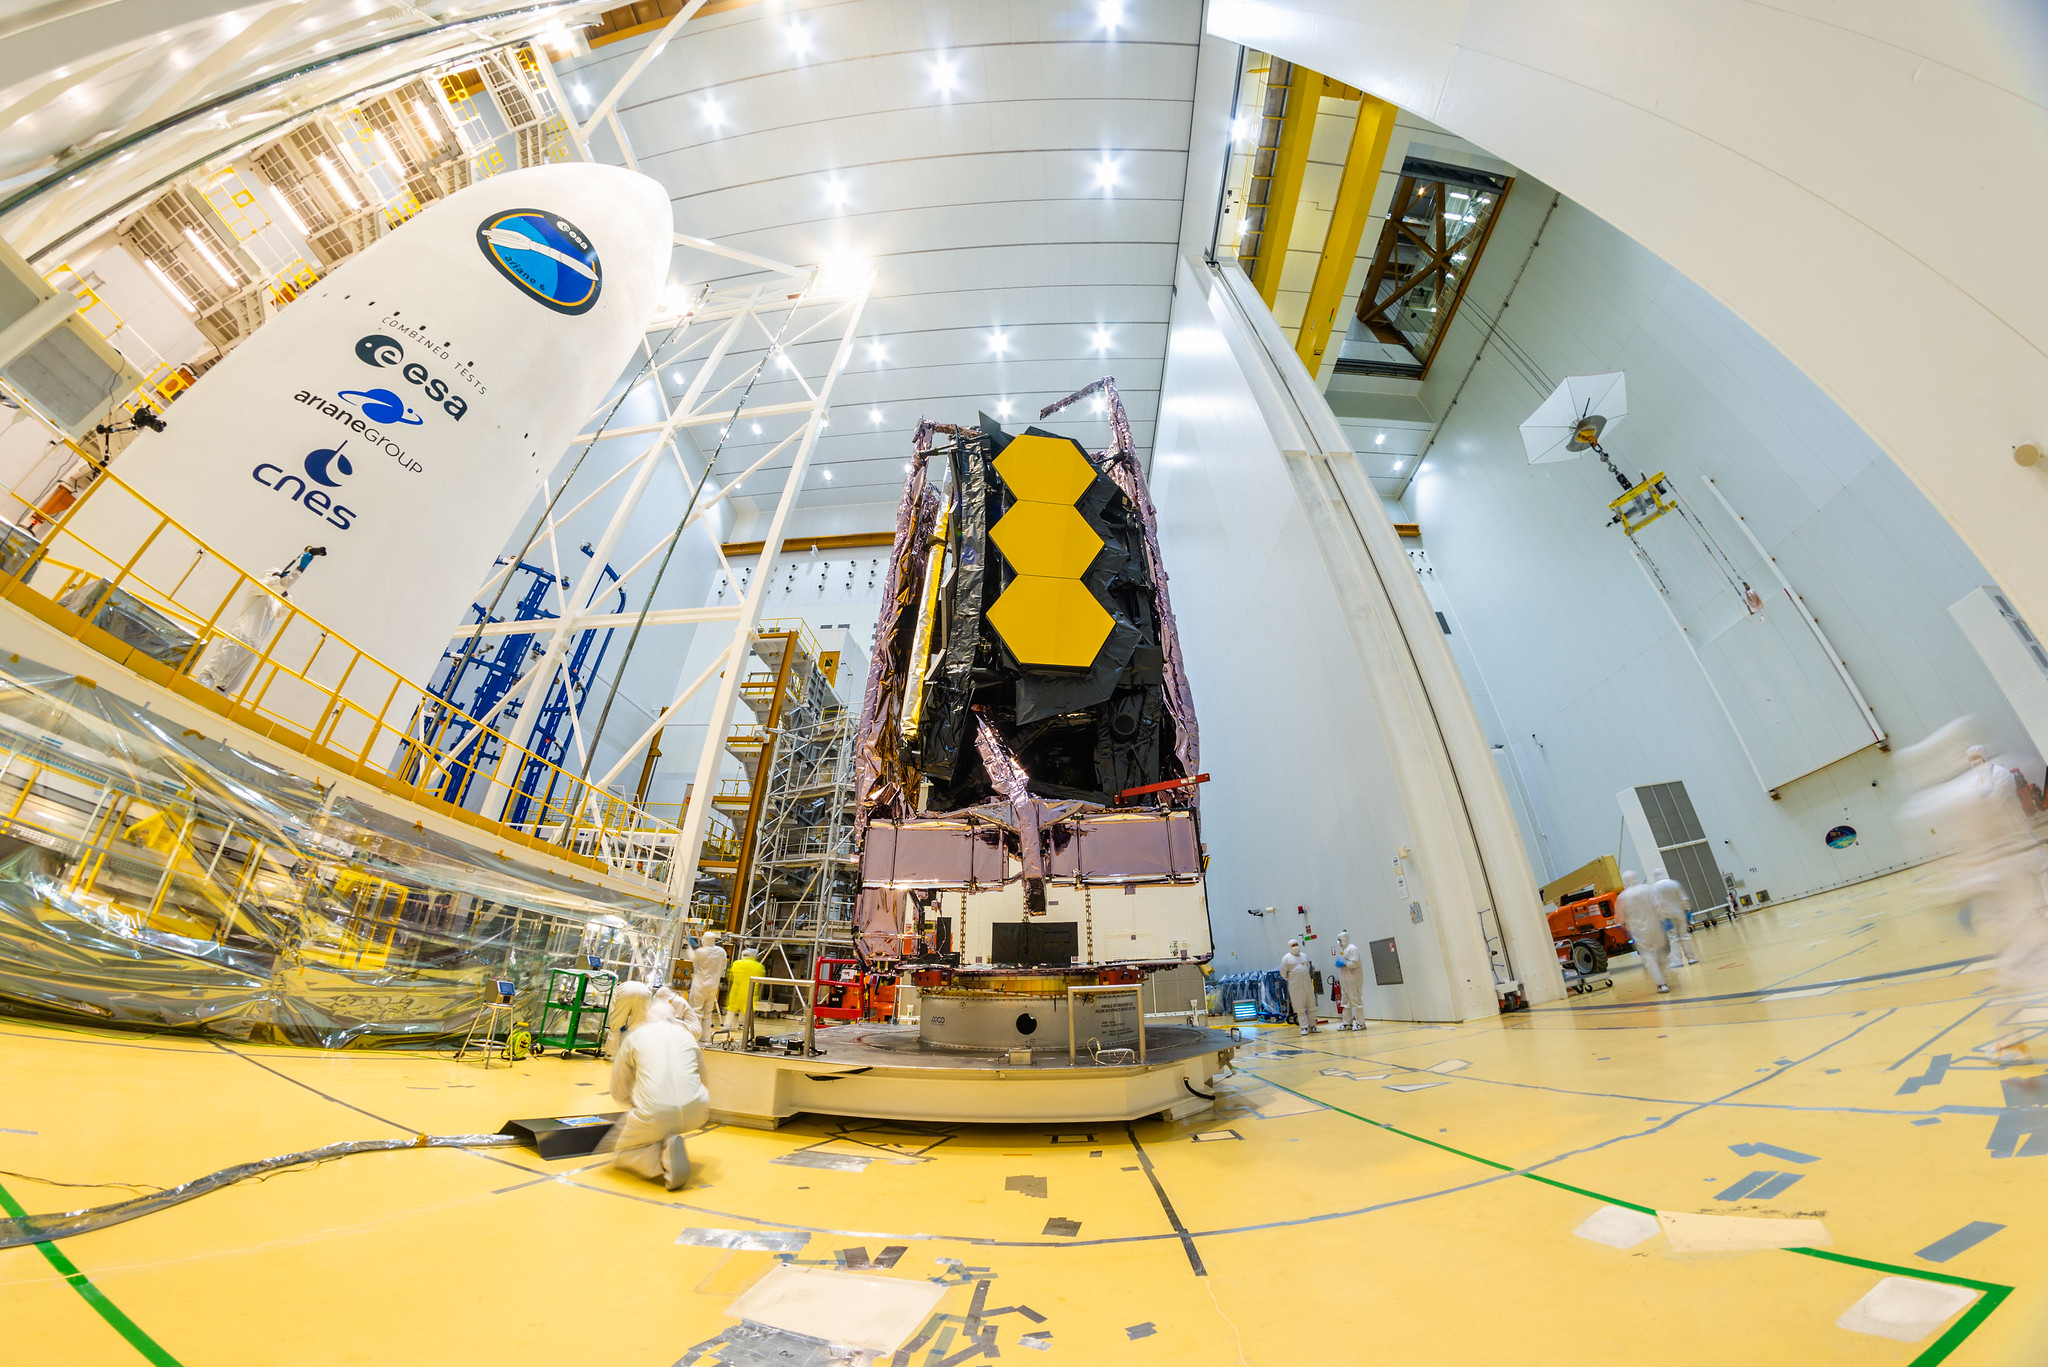 On Saturday, Dec. 11, NASA’s James Webb Space Telescope was secured on top of the Ariane 5 rocket that will launch it to space from Europe’s Spaceport in French Guiana.